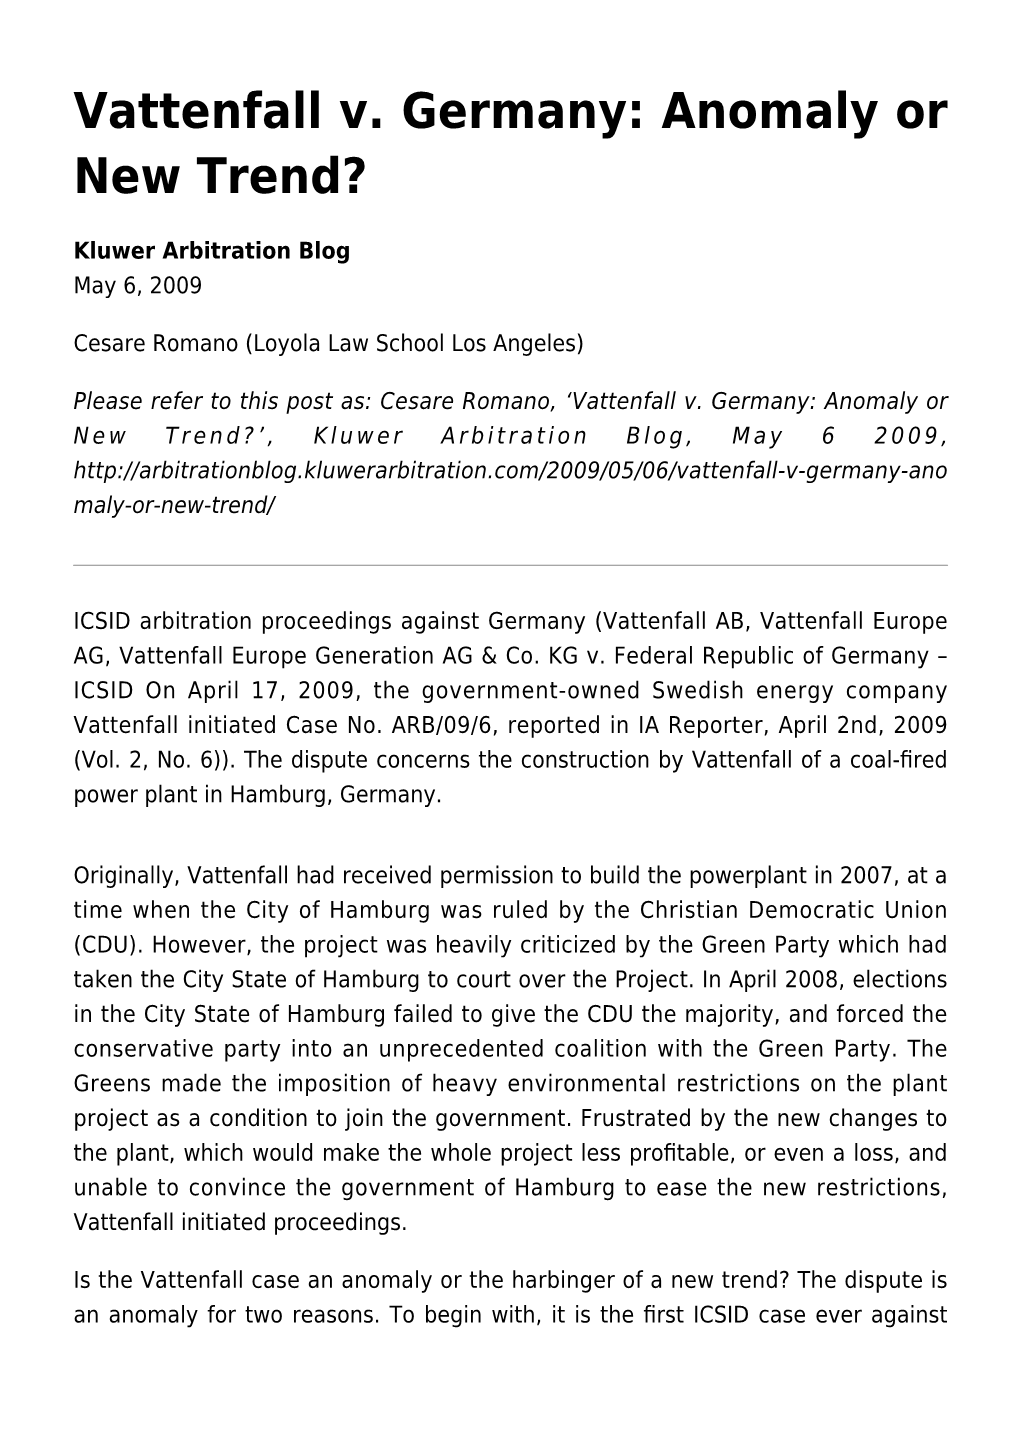 Vattenfall V. Germany: Anomaly Or New Trend?